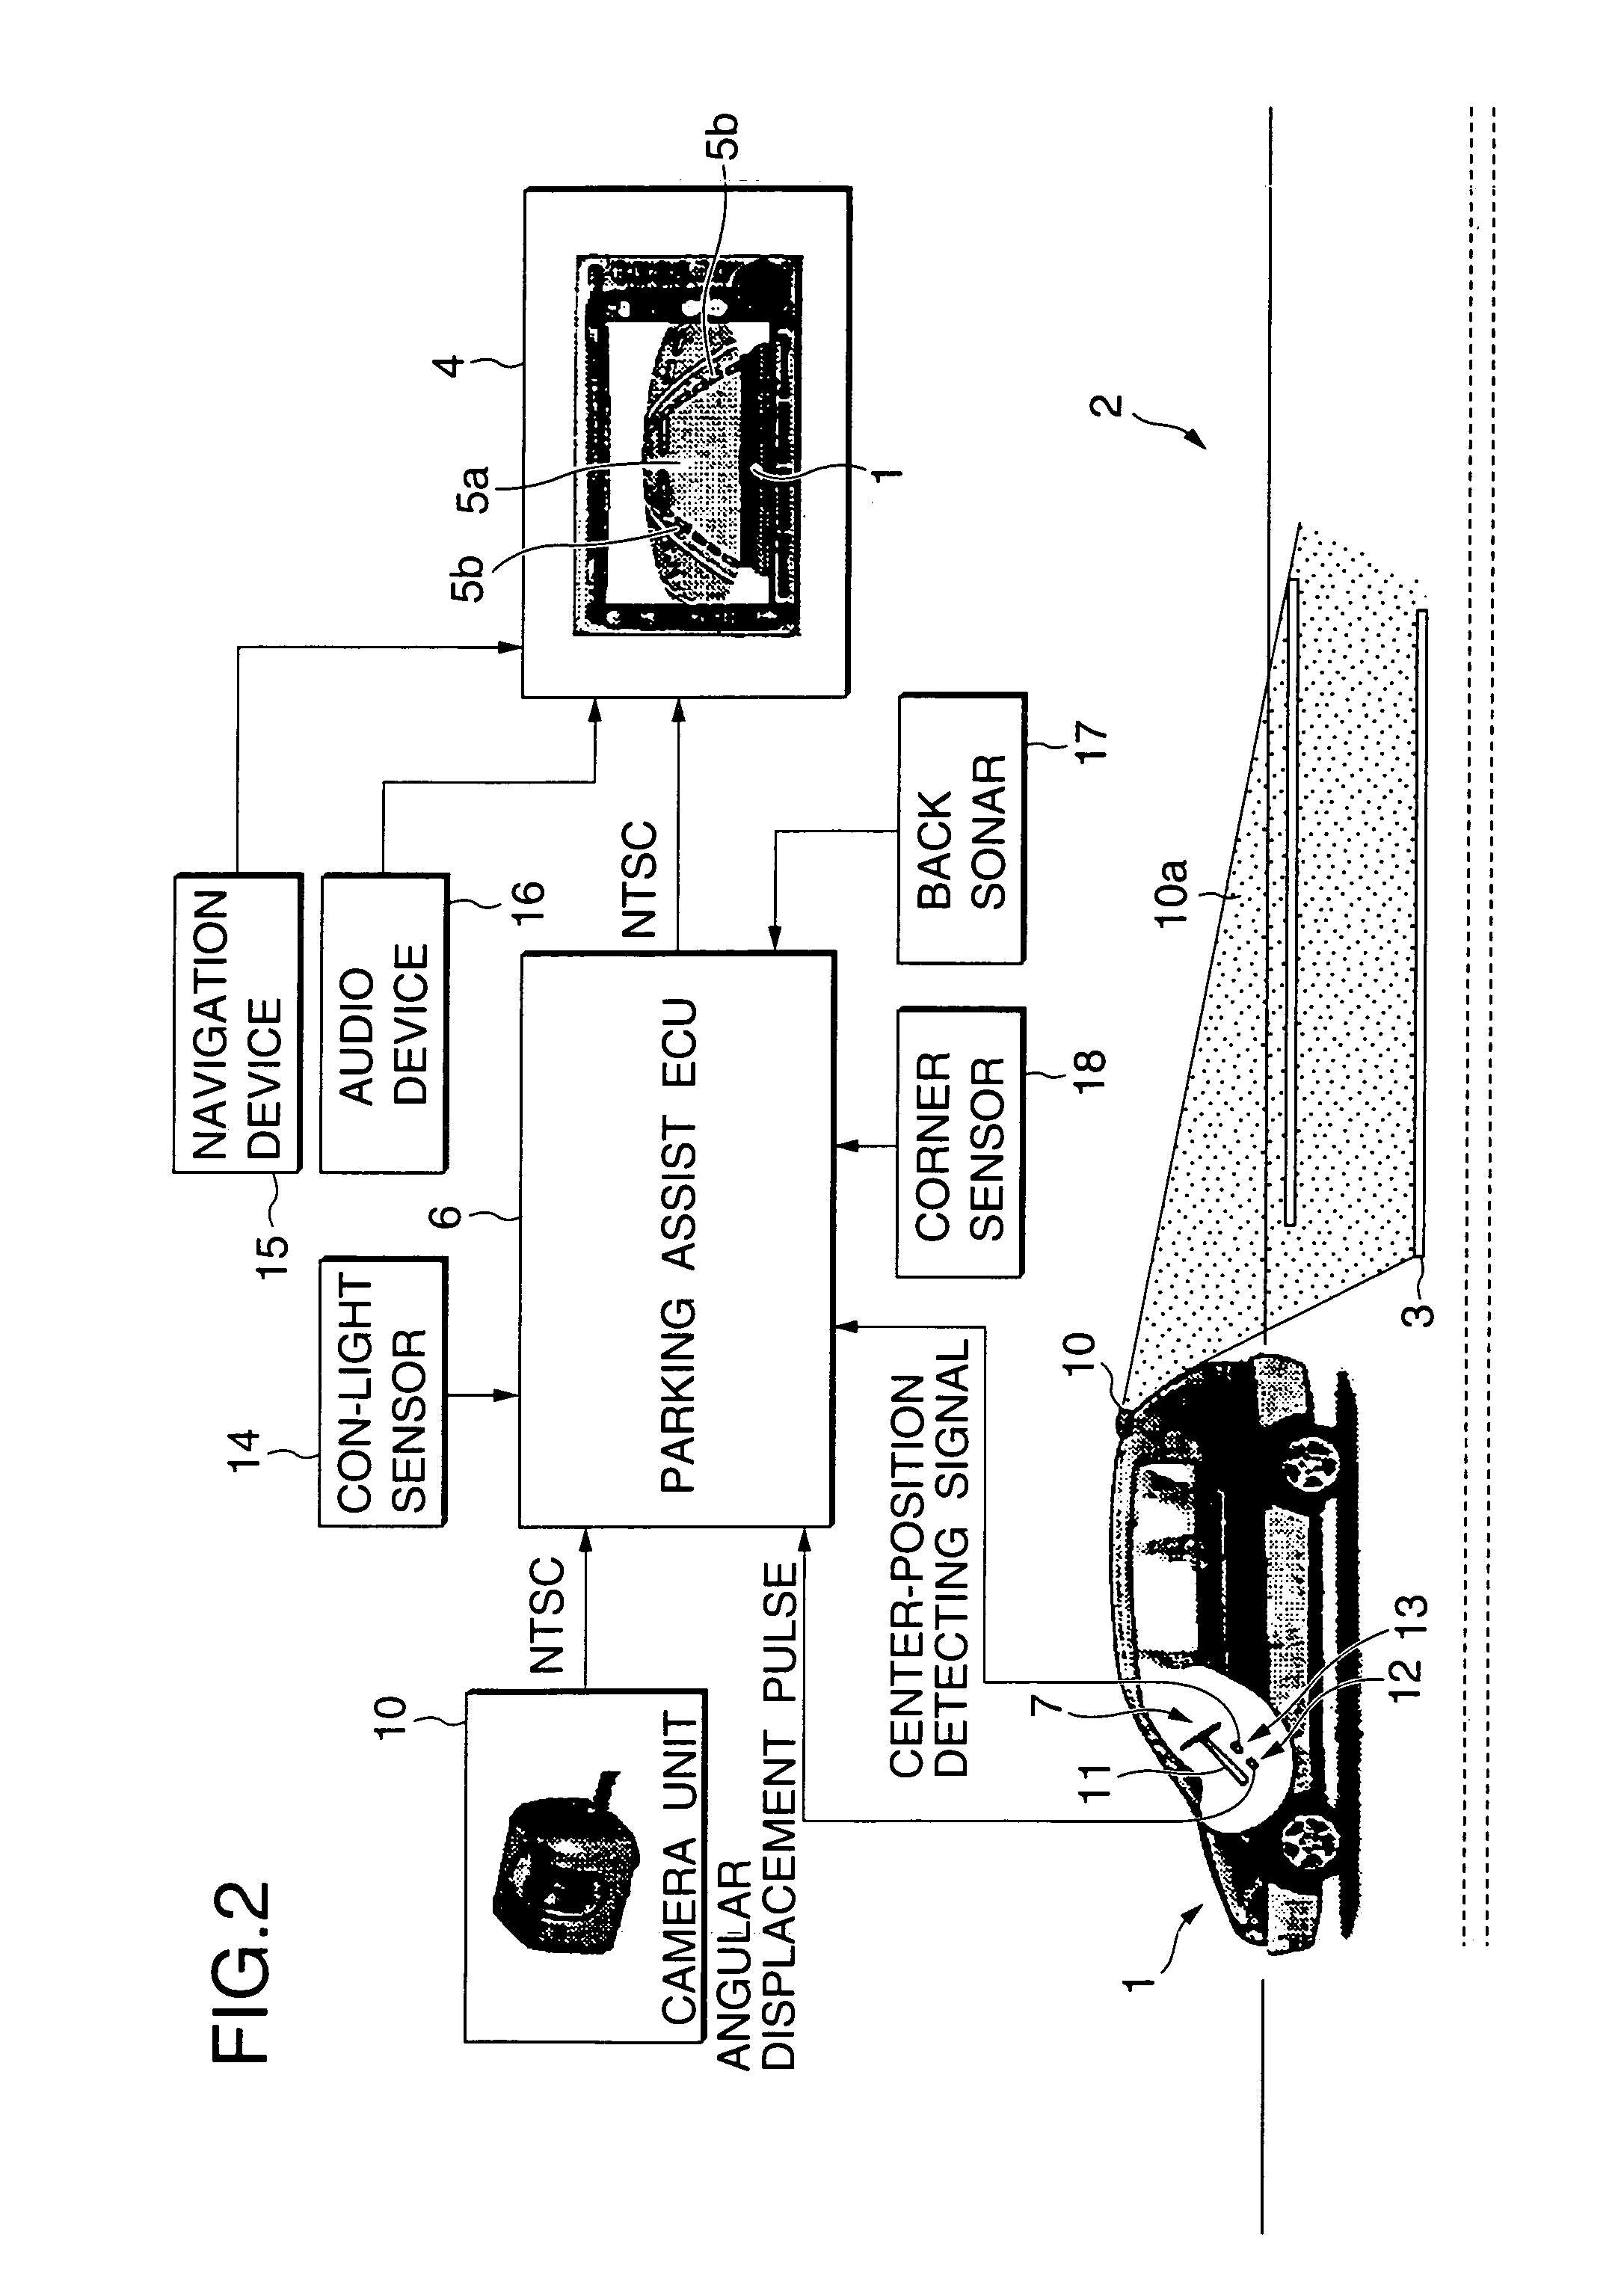 Vehicle drive assist system